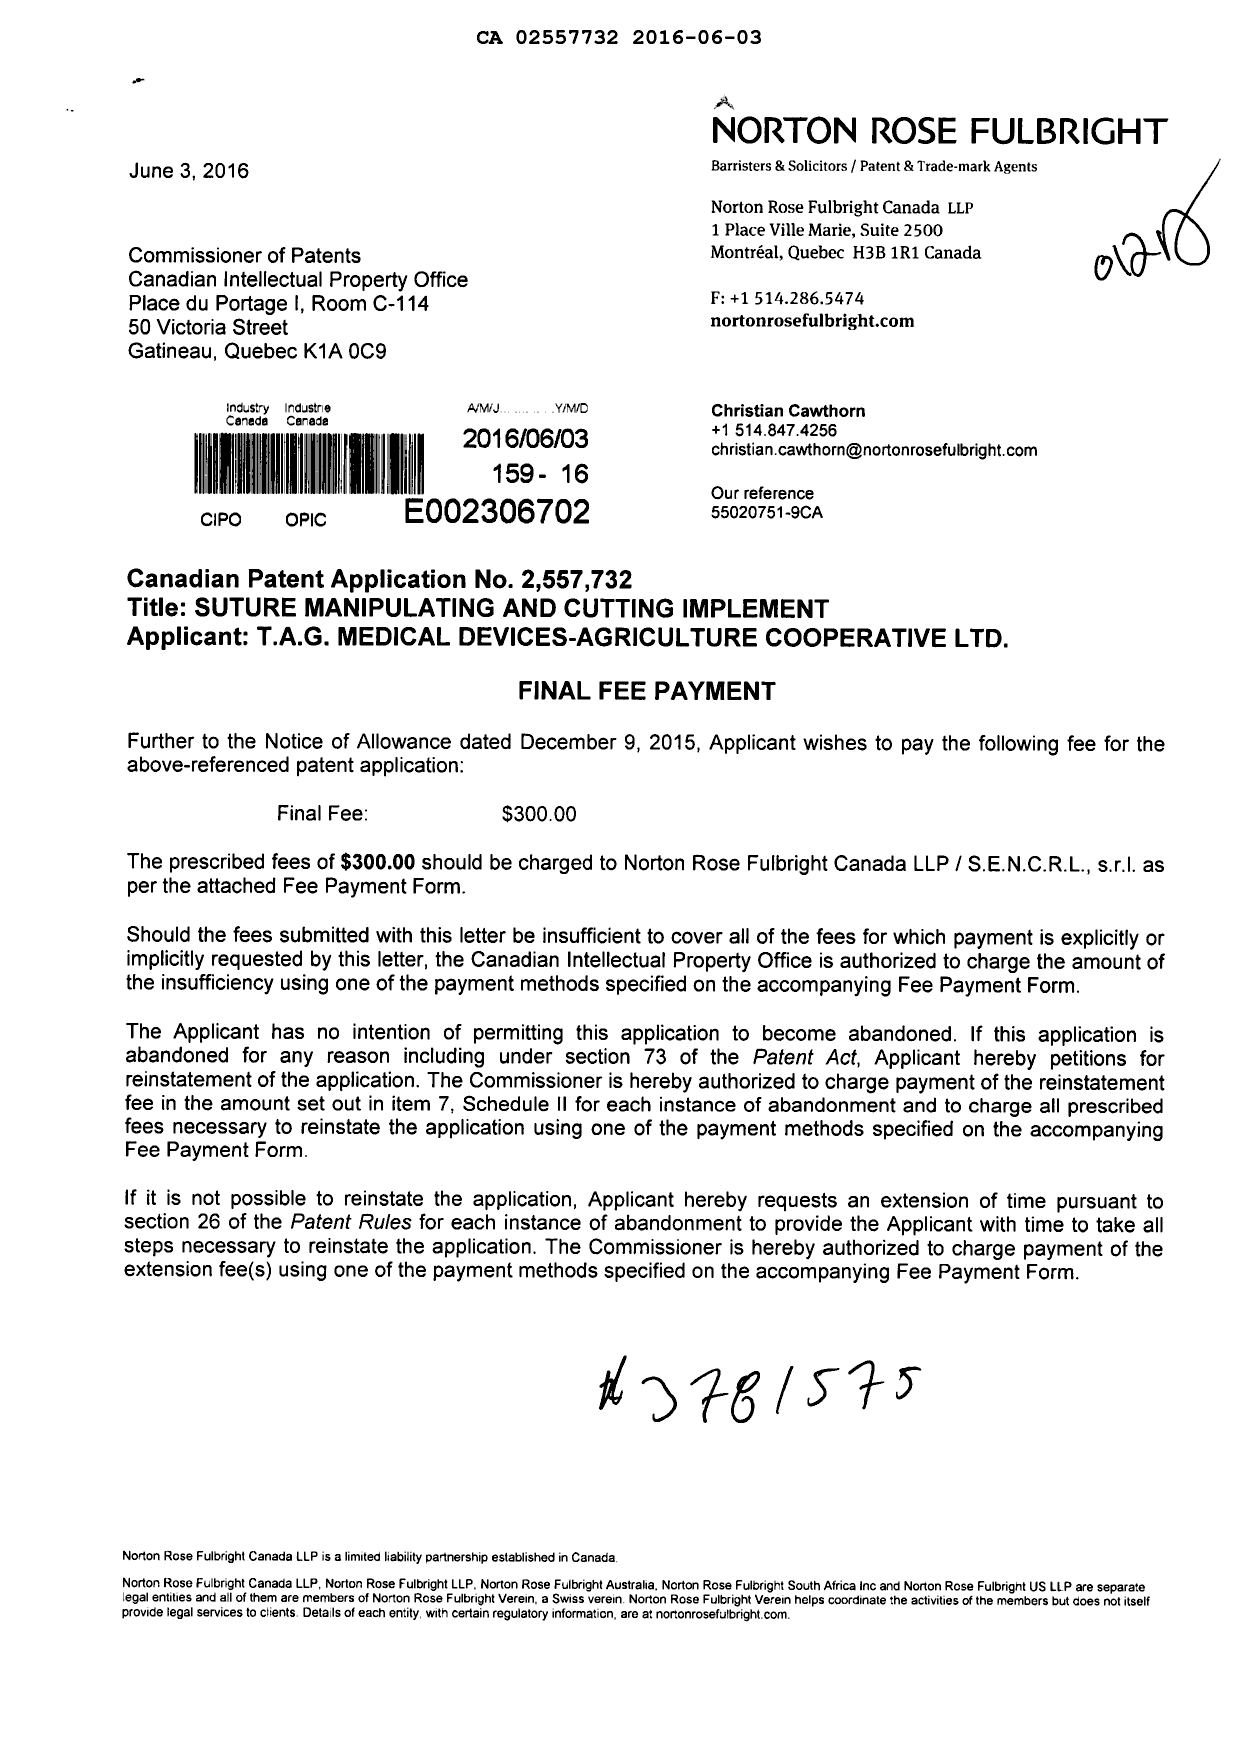 Canadian Patent Document 2557732. Final Fee 20160603. Image 1 of 2